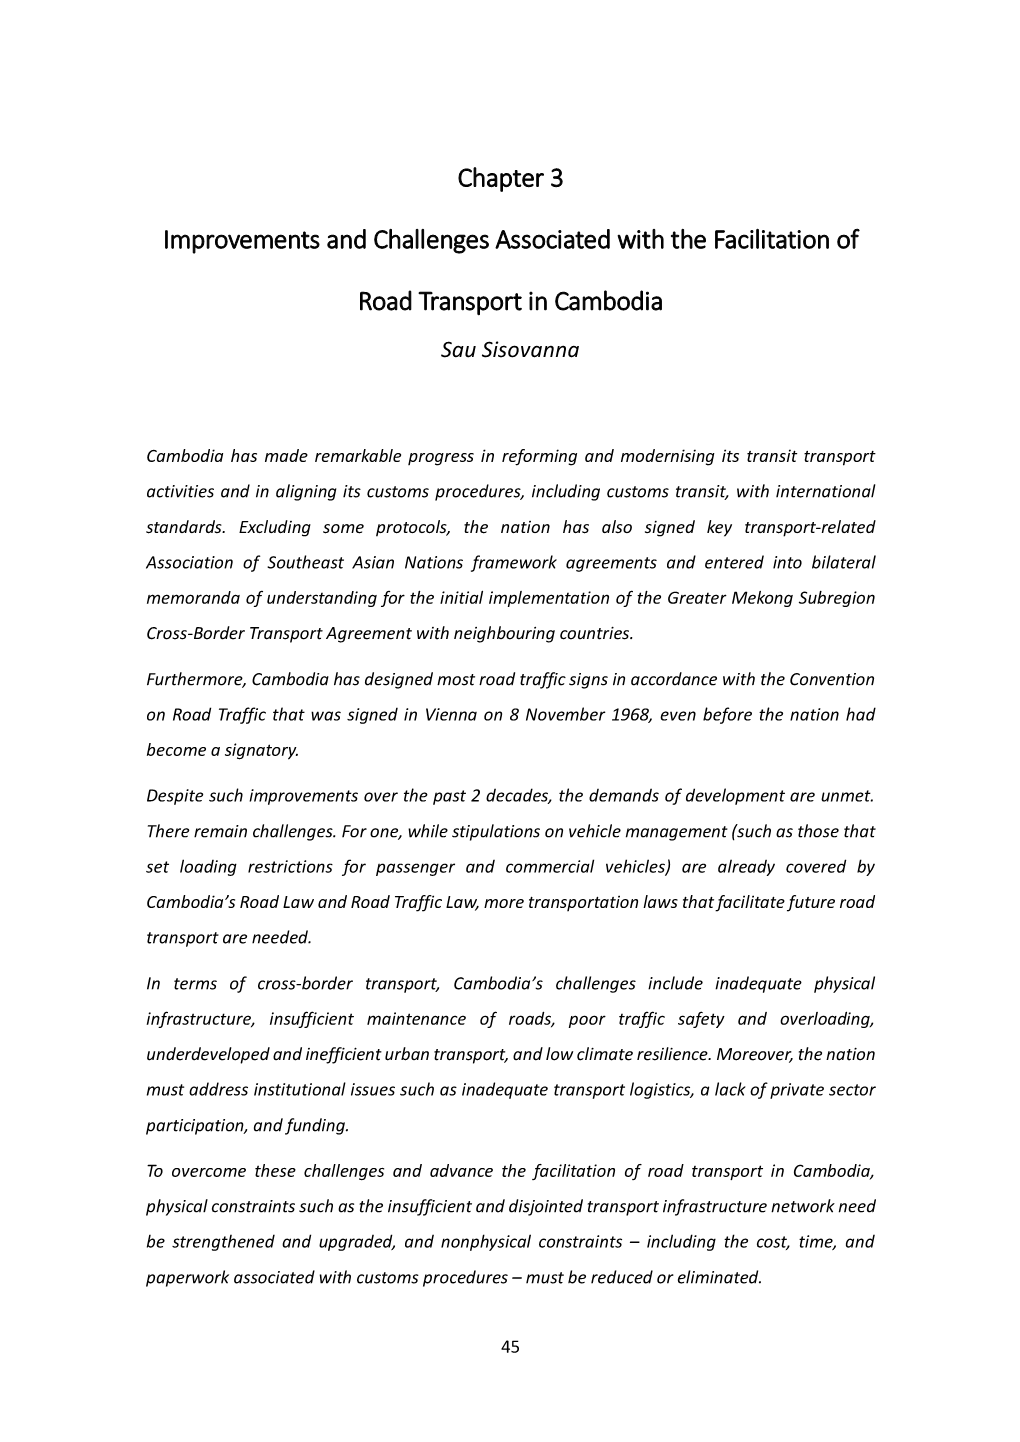 Improvements and Challenges Associated with the Facilitation Of